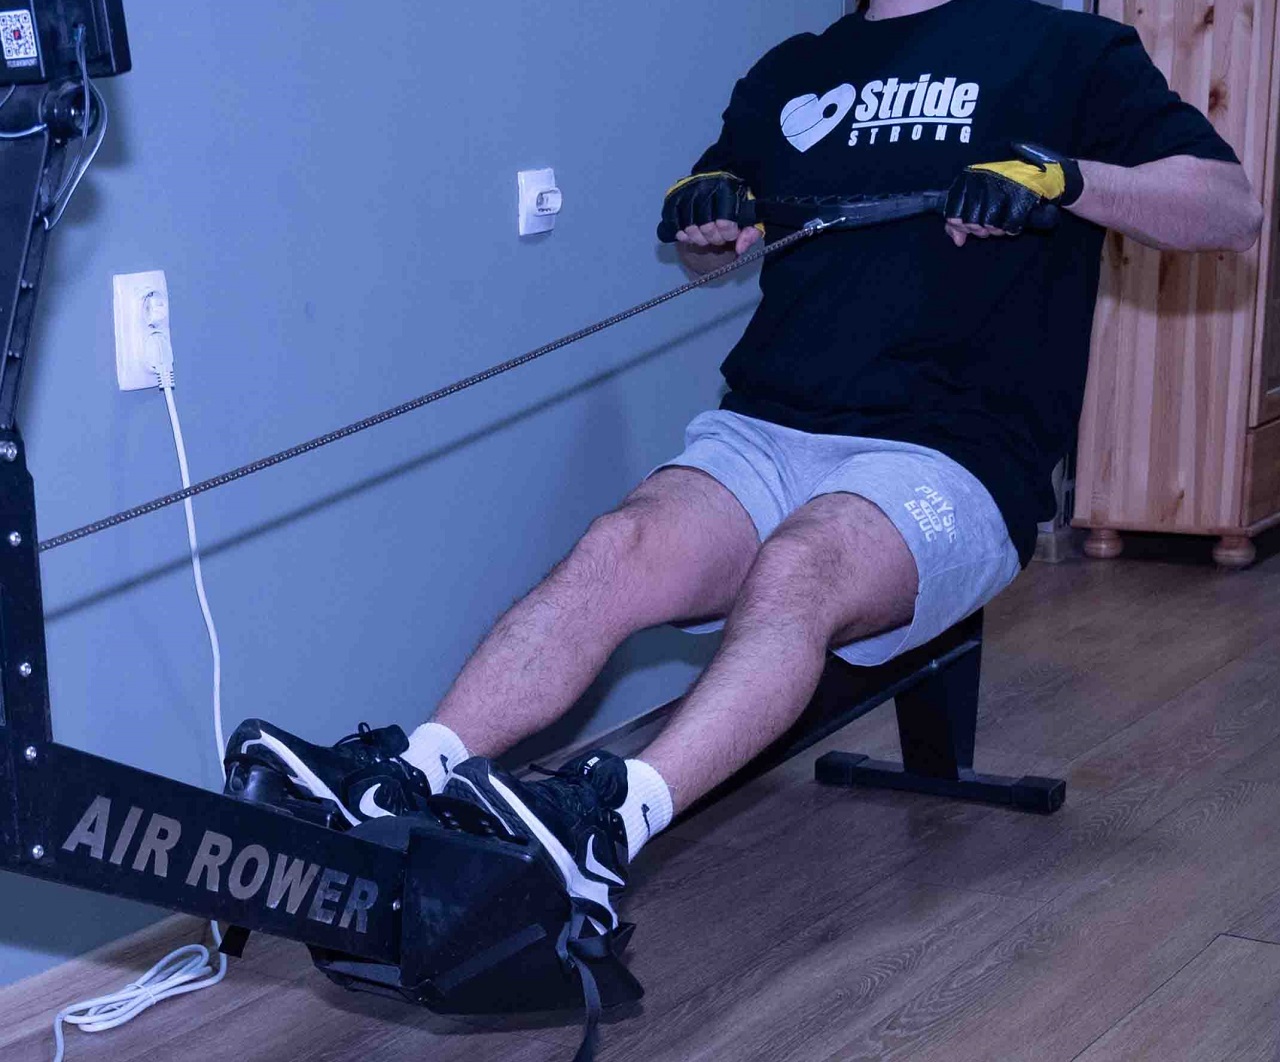 The finishing position during the rowing process